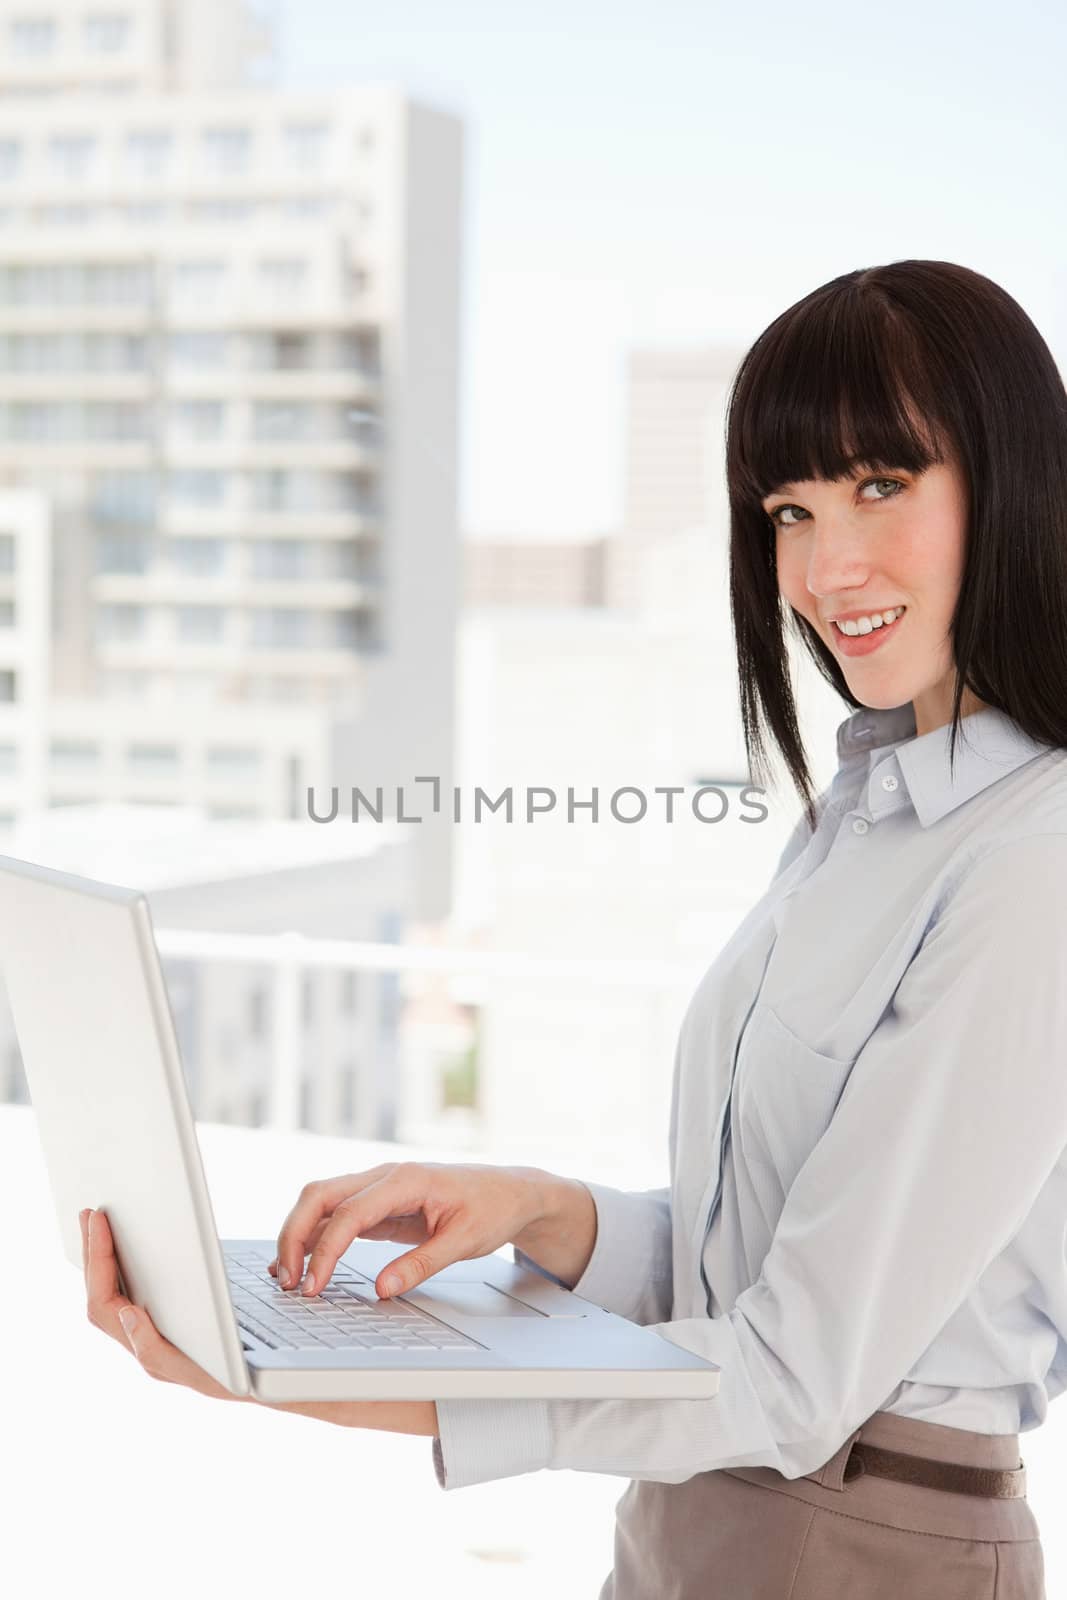 A woman looking at the camera while holding a laptop by Wavebreakmedia